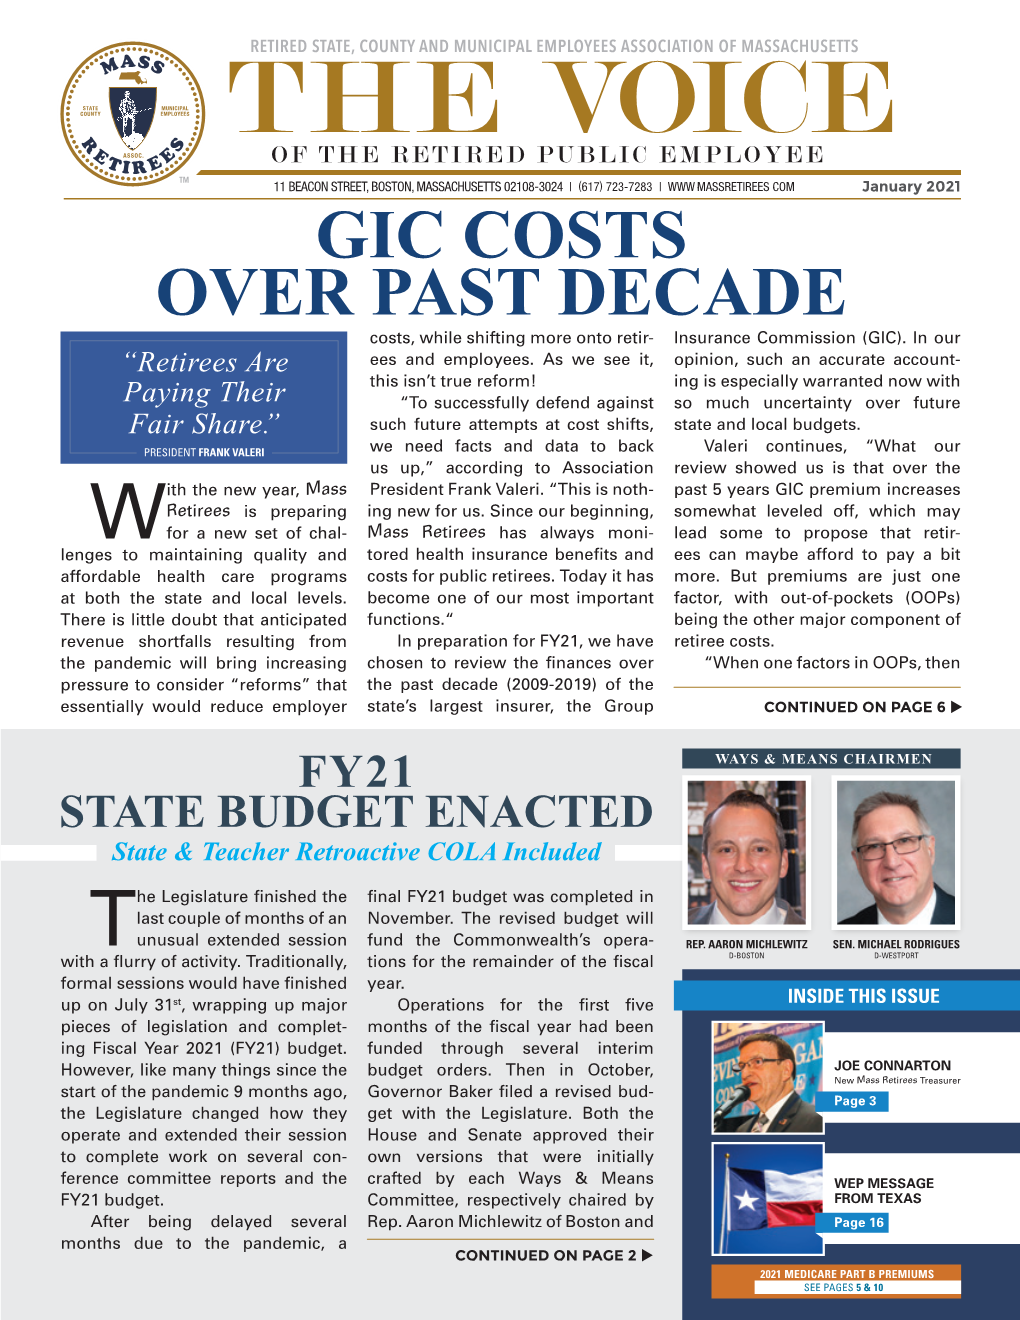 GIC COSTS OVER PAST DECADE Costs, While Shifting More Onto Retir- Insurance Commission (GIC)